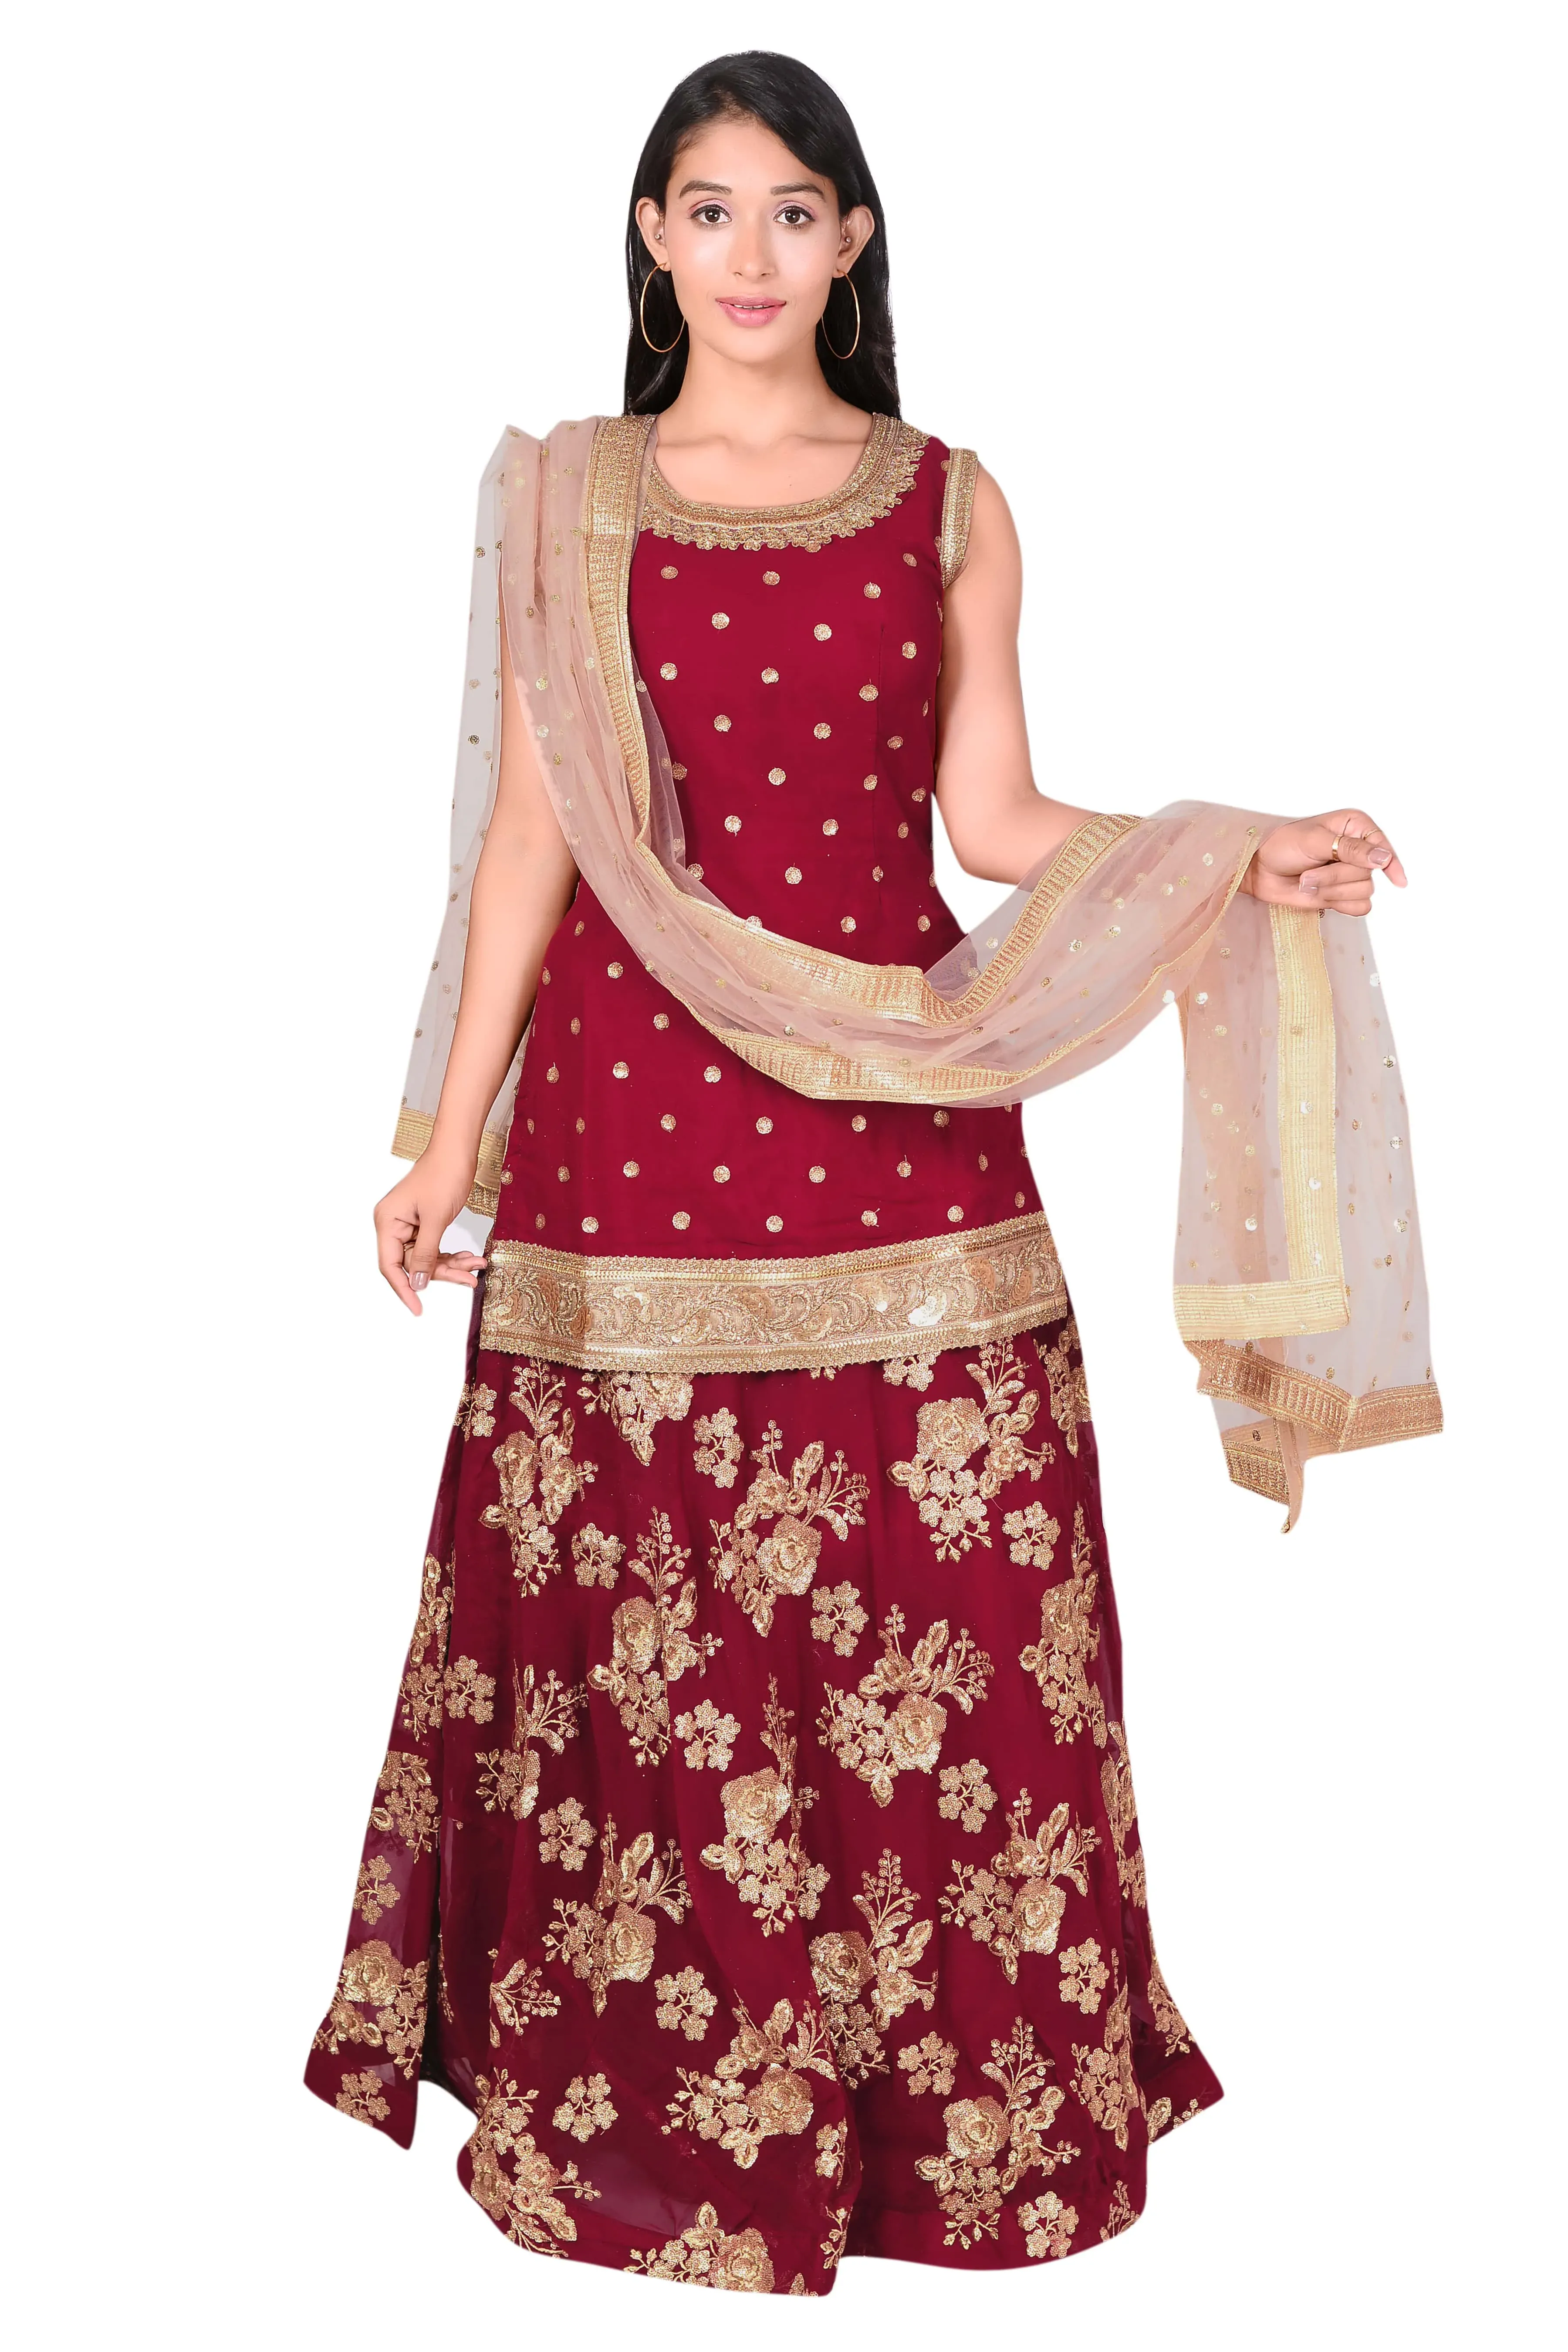 Trending Ethnic Wear Choices To Try This Karwa Chauth